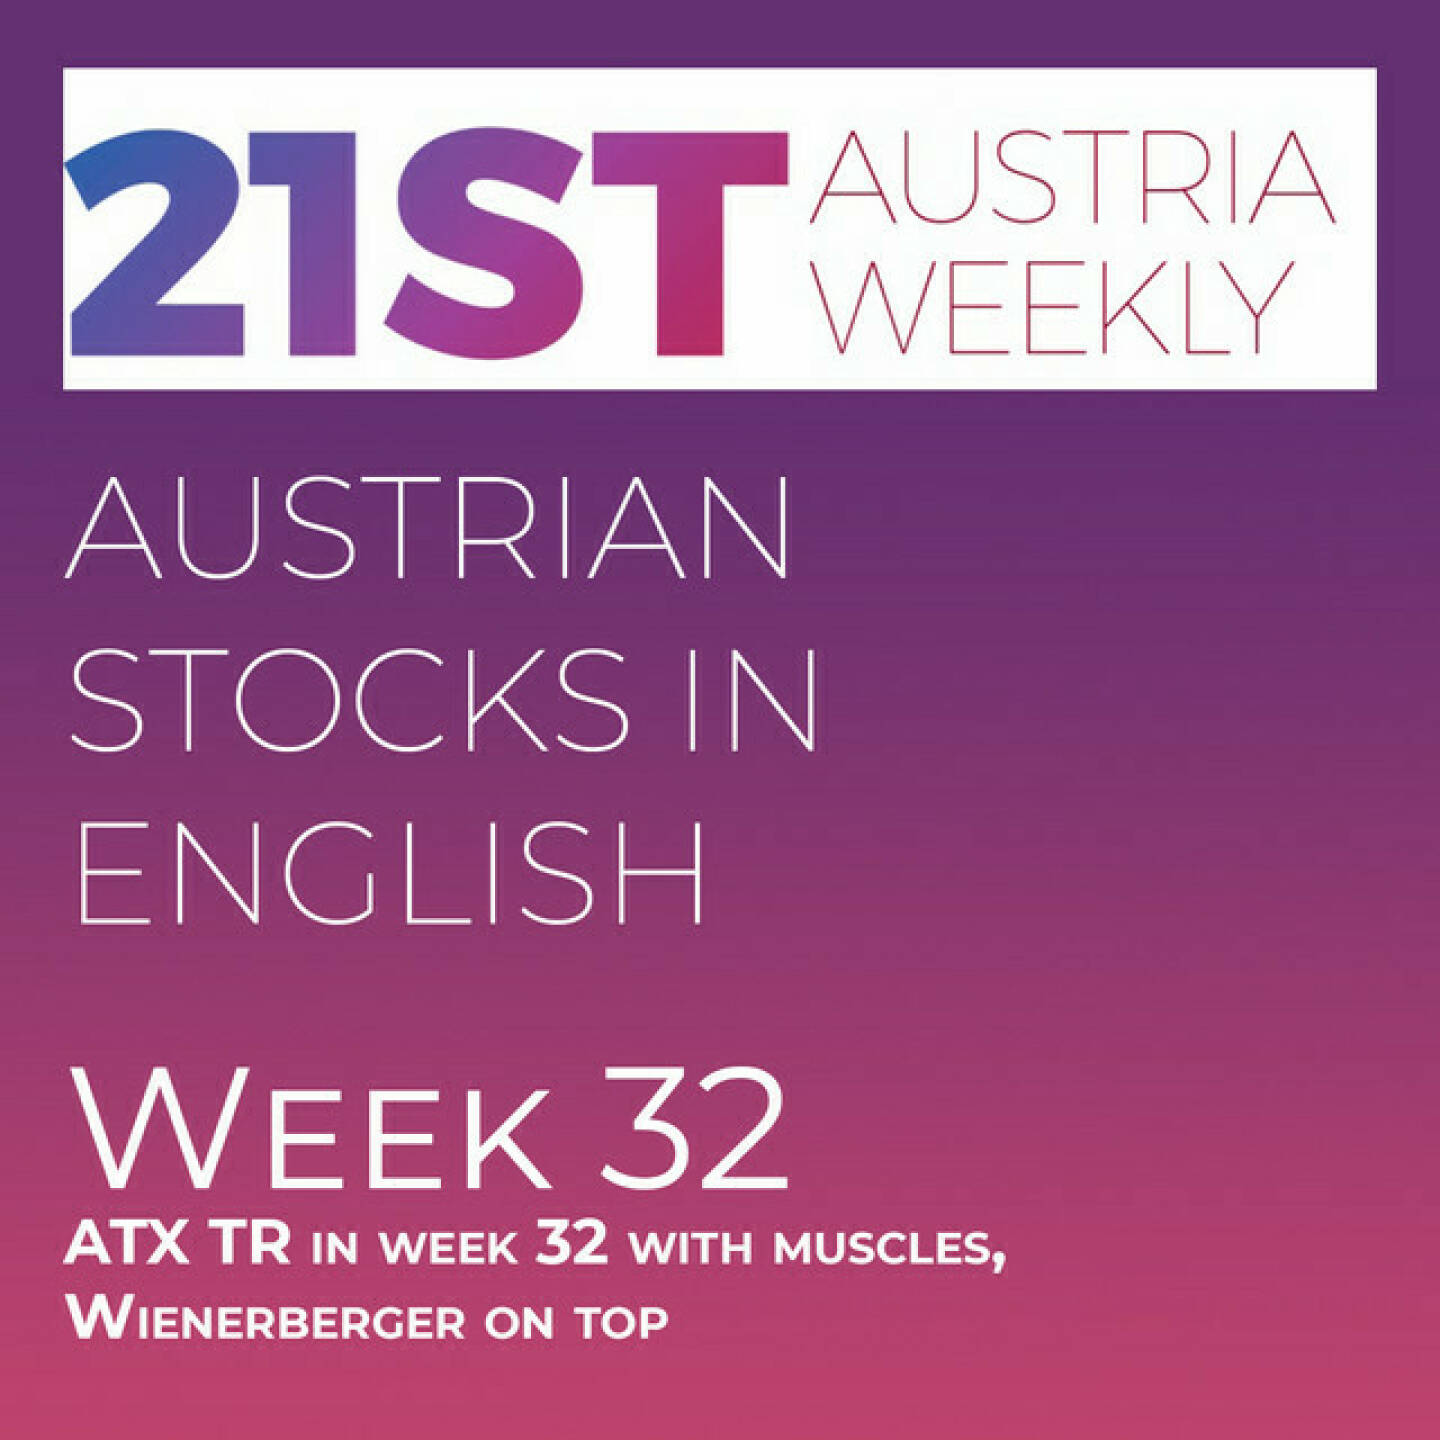 https://open.spotify.com/episode/4qDe1BdQfArWA250j4oiLI
Austrian Stocks in English: ATX TR in week 32 with muscles, Wienerberger on top - <p>Welcome to &#34;Austrian Stocks in English - presented by Palfinger&#34;, the new and weekly english spoken Summary for the Austrian Stock Market, positioned every Sunday in the mostly german languaged Podcast &#34; Christian Drastil - Wiener Börse, Sport Musik und Mehr“ . Week 32 was a very good one.  ATX TR went up 2,1% to 6.515,1 points, it was also a comeback over the moving average 100 of this index. Year-to-date ATX TR is now at  minus 16,99%. <br/>These are the best-performers this week: Wienerberger 10,25% in front of Uniqa 6,33% and Andritz 5,71%. And the following stocks performed worst: Kapsch TrafficCom -2,29% in front of SBO -2,29% and FACC -1,45%. <br/>News came from Andritz (2), CA Immo, A1 Telekom Austria (2), Semperit, Wolford, Kapsch TrafficCom, Vienna Airport, S Immo, Erste Group, Zumtobel, voestalpine and OMV. spoken by the absolutely smart Allison.</p>